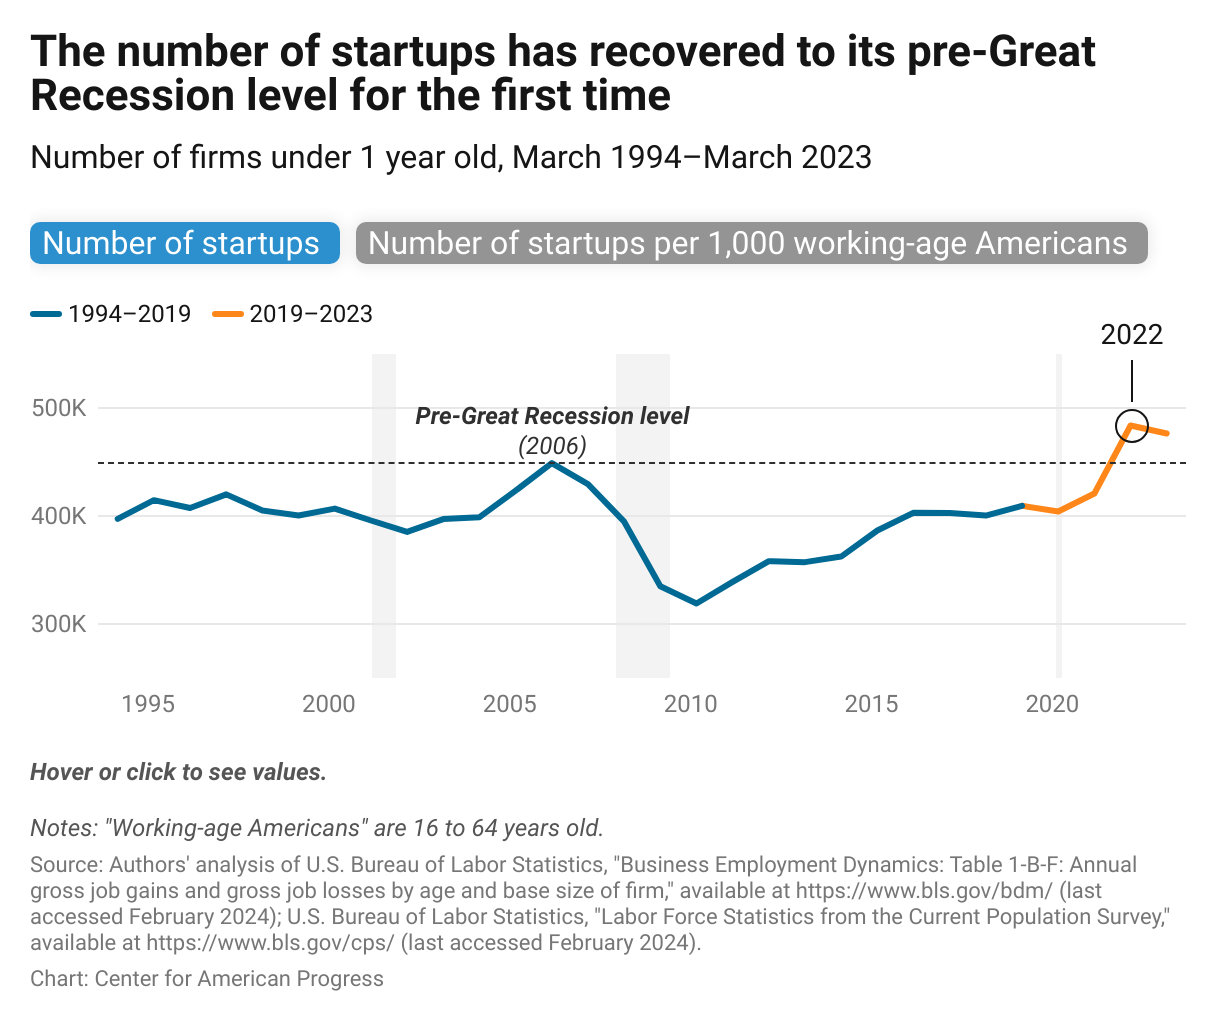 Line chart showing the number of startups (firms under 1 year old) and the number per working-age adult relative to their 2006 pre-Great Recession levels. The number of startups remained much lower than the 2006 level until surging past it in 2022. Startups per working age-adult also surged in 2022 and now are essentially at their 2006 level.